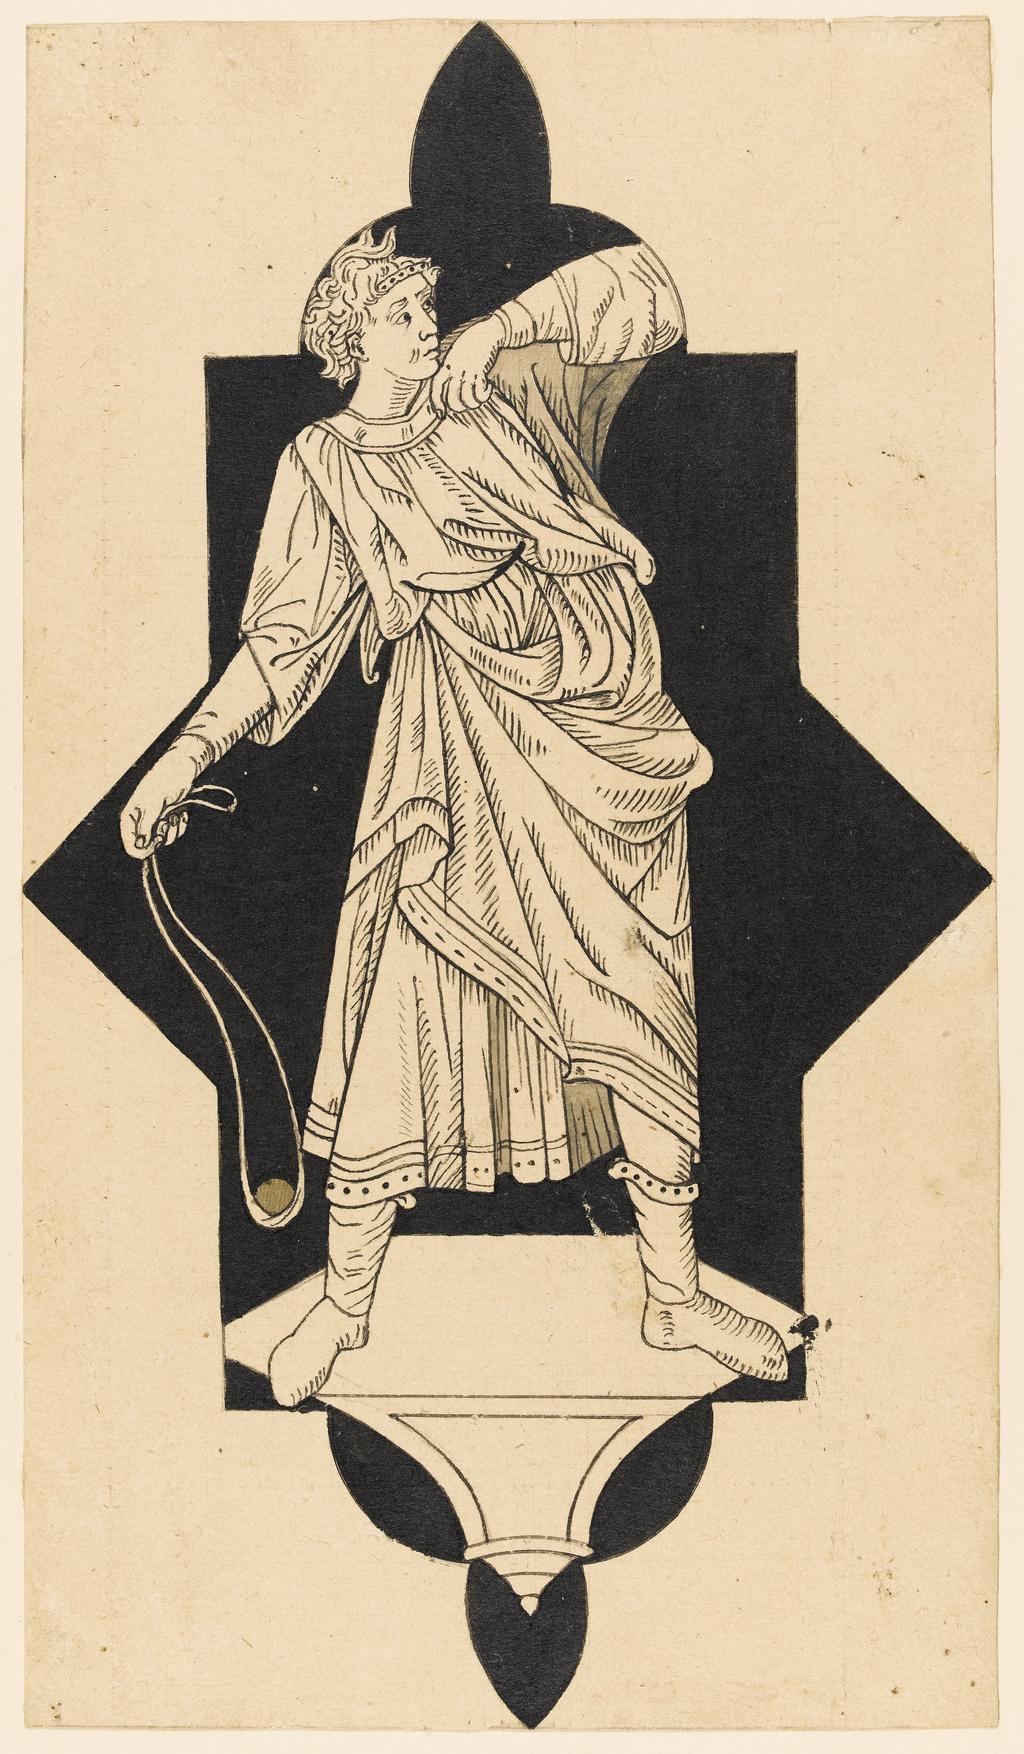 An image of Title/s: Drawing reduced from tracings taken from the inlaid marble pavement of Siena Cathedral during its restoration in the nineteenth centuryTitle/s: Young David with a sling Maker/s: Maccari, Leopoldo (draughtsman) [ULAN info: Italian artist, 1850-1894?]Technique Description: pen and black ink, black and grey wash on lightly squared paper Dimensions: height: 244 mm, width: 139 mm